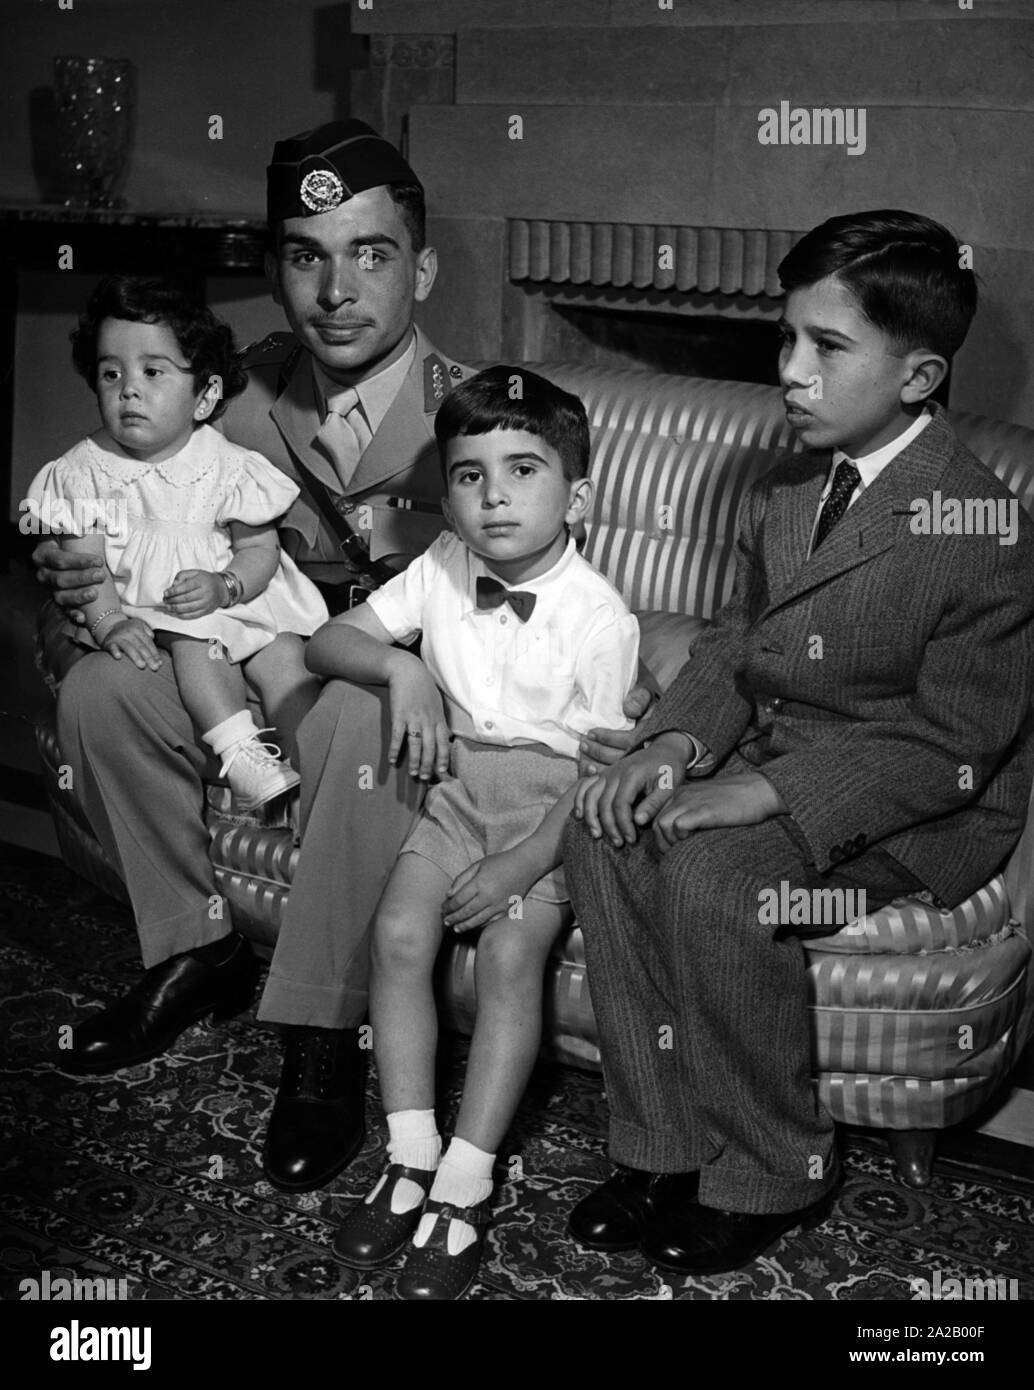 The King of Jordan, Hussein bin Talal, in the Basman Palace in Amman /  Jordan, with his siblings. From left to right: Princess Basma, King Hussein  I, Prince Hassan and Crown Prince